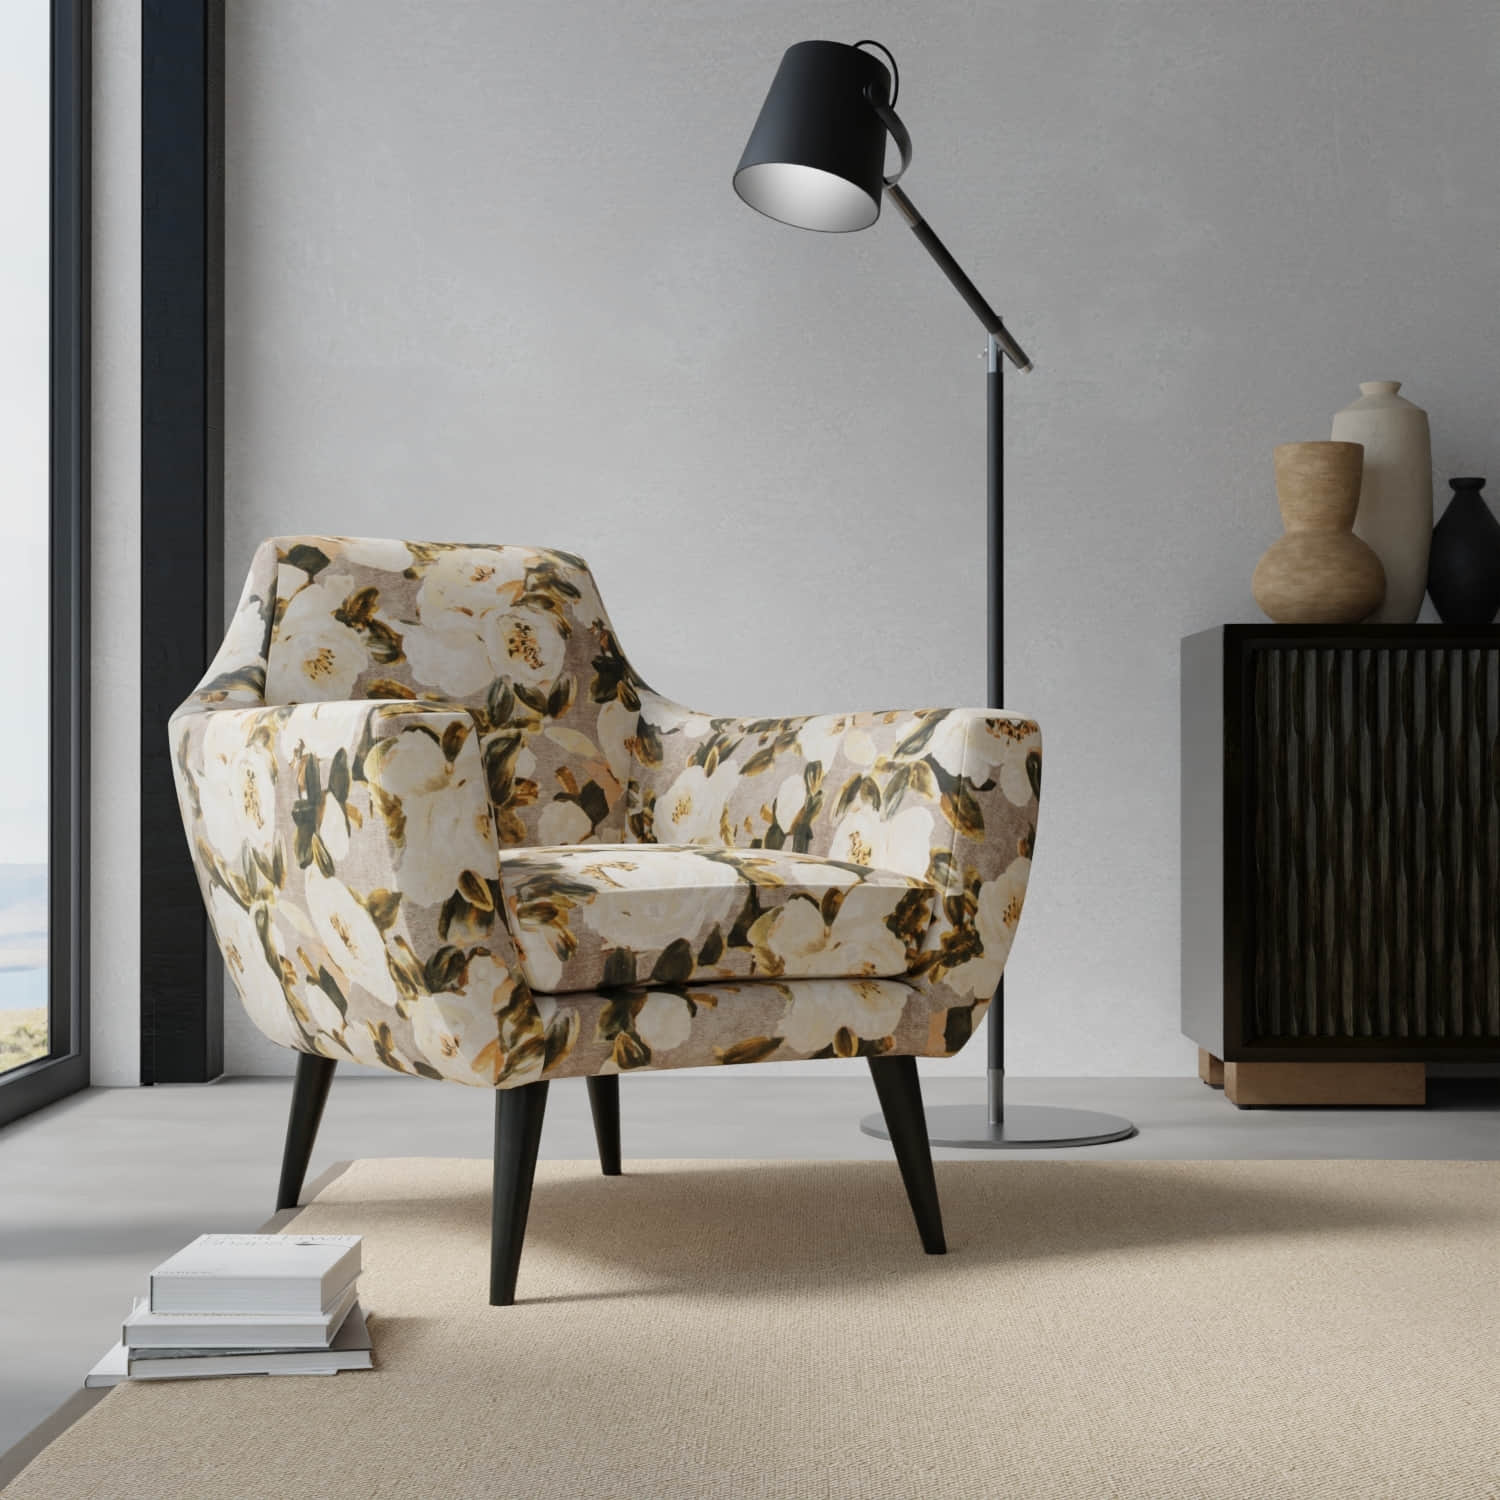 Julia Latte upholstered on a contemporary chair